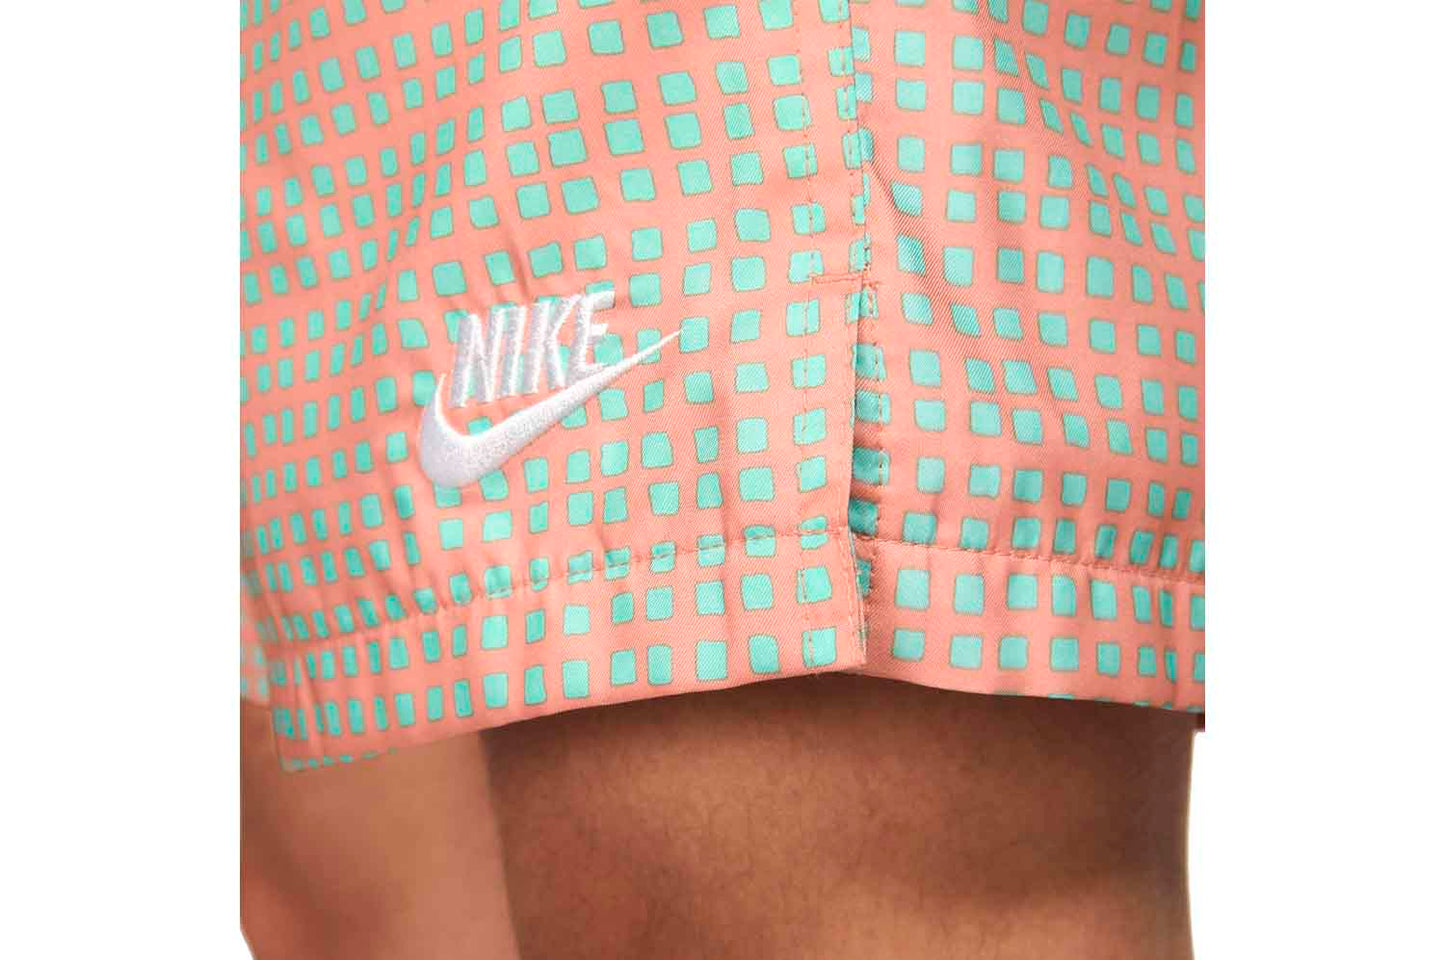 Woven Flow Shorts - City Edition